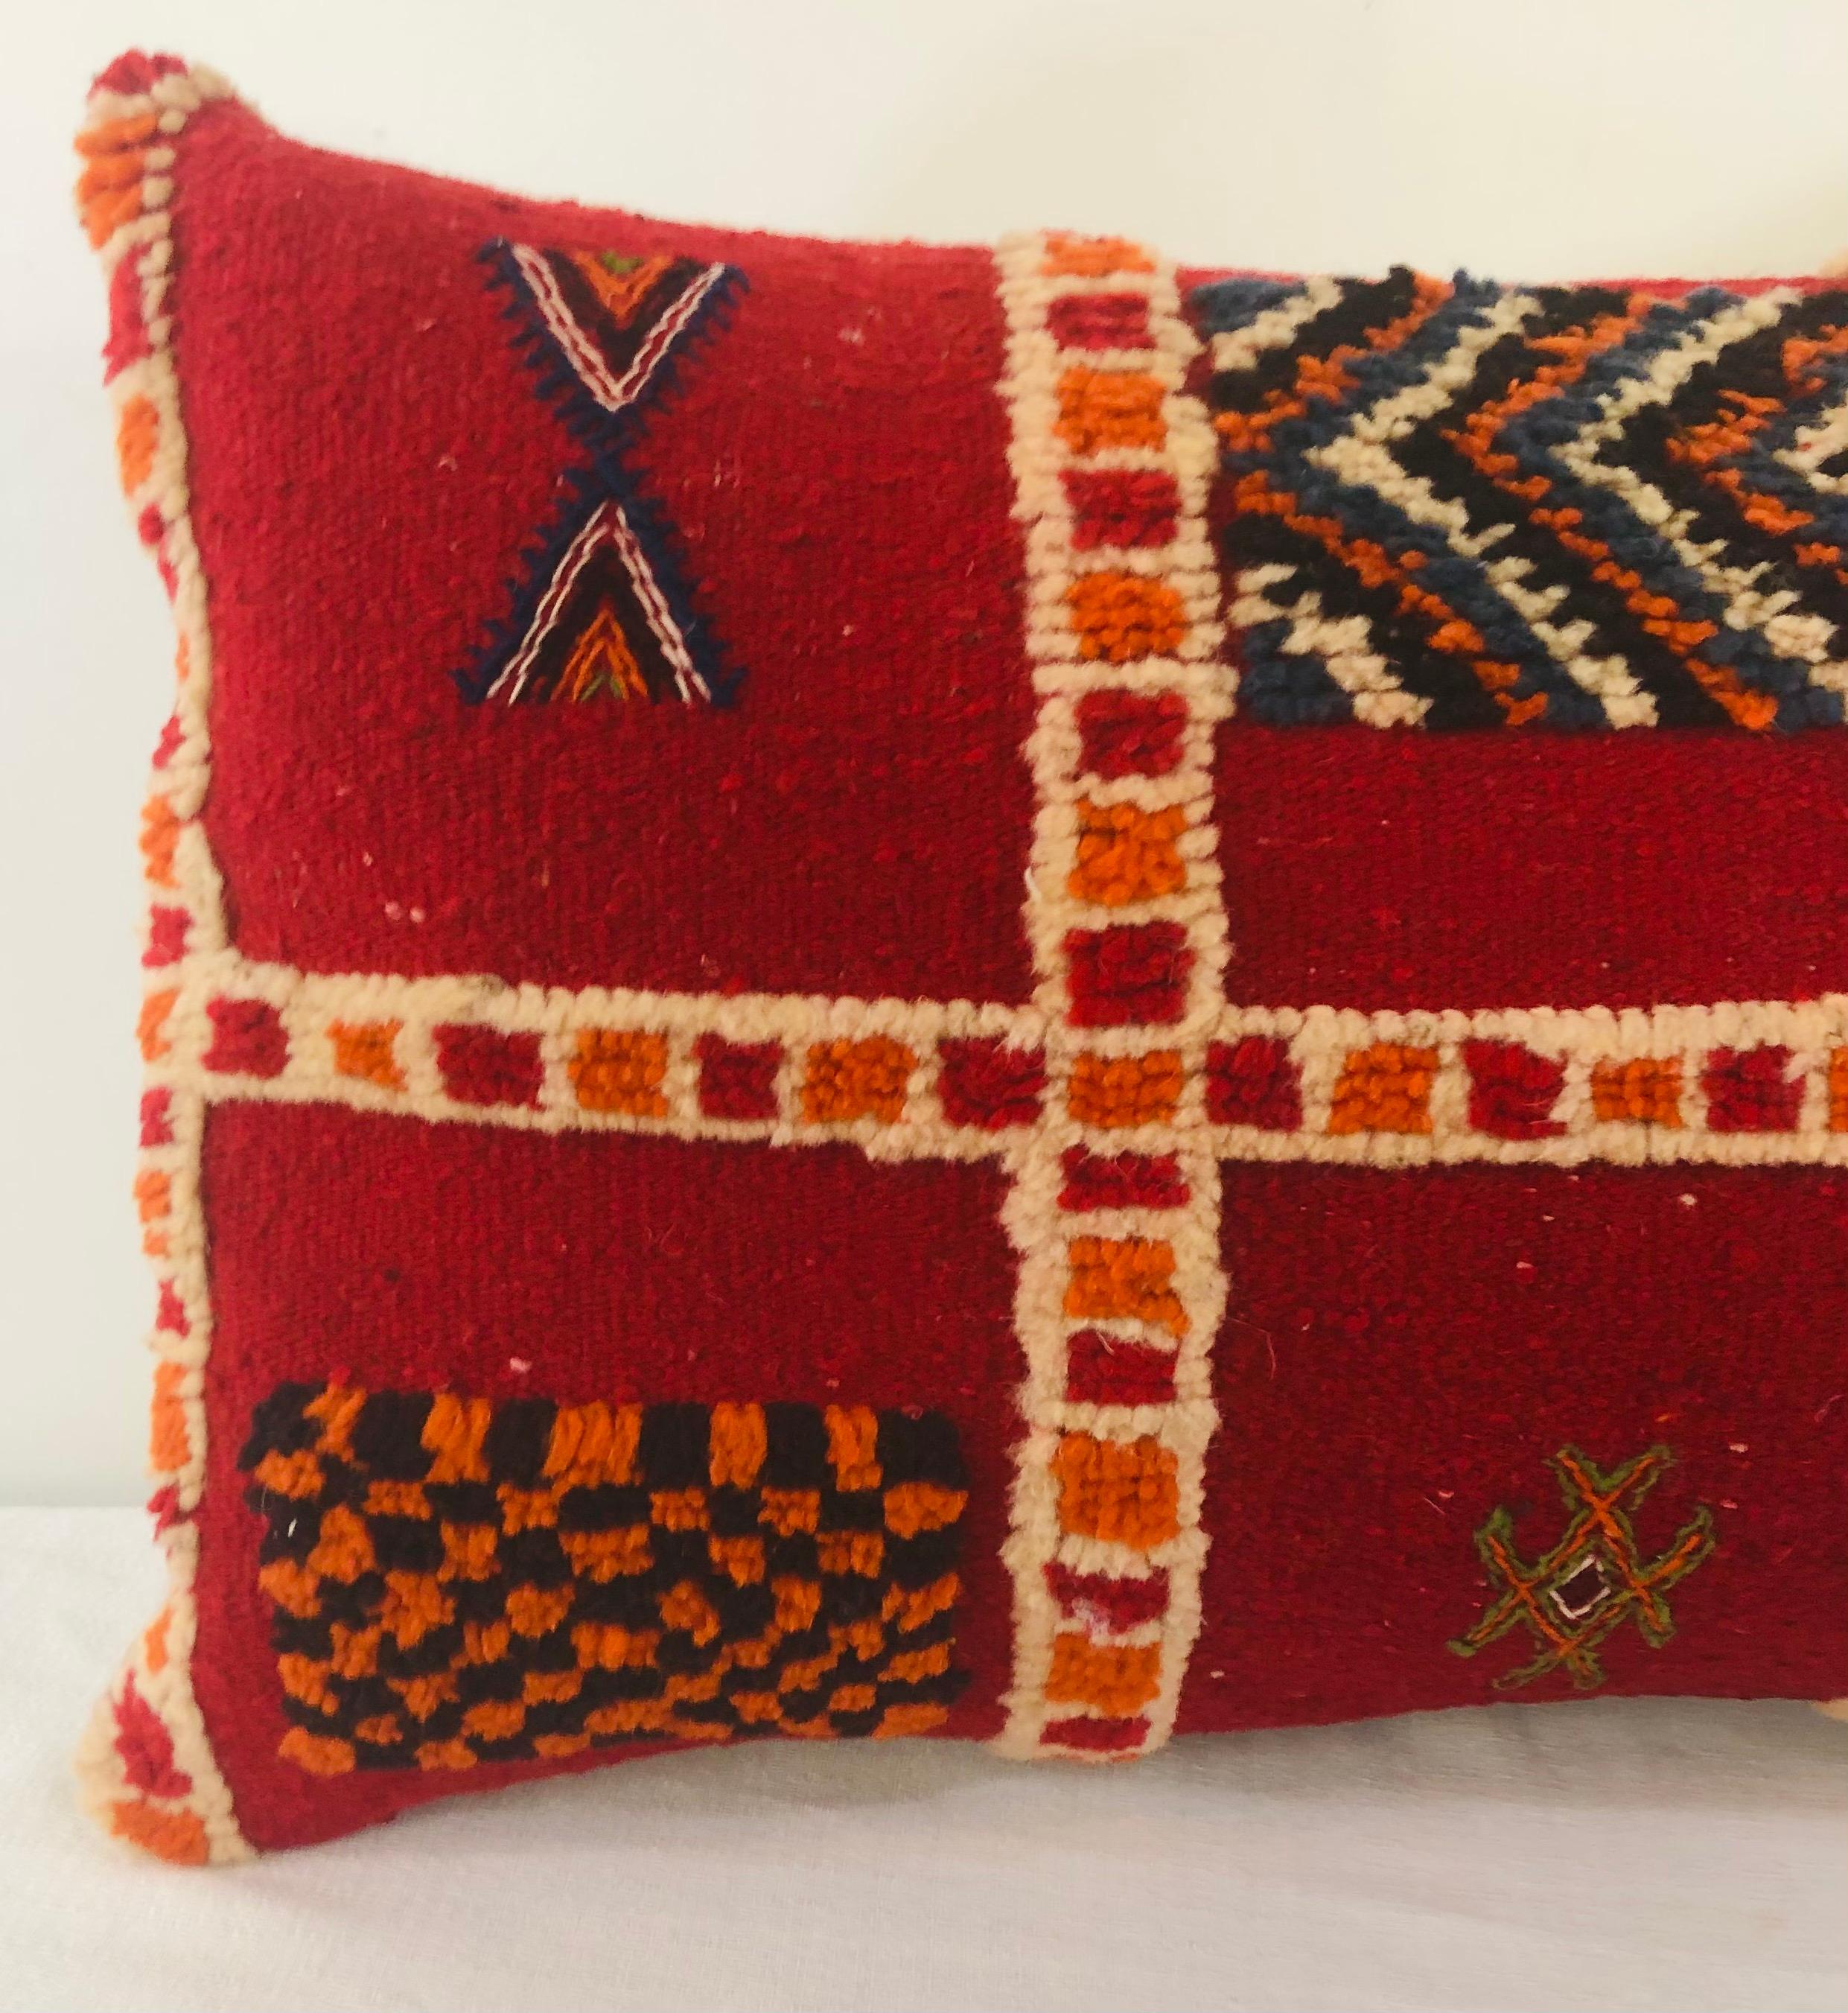 Moroccan Tribal Wool Vintage Kilim Cushions, a Pair For Sale